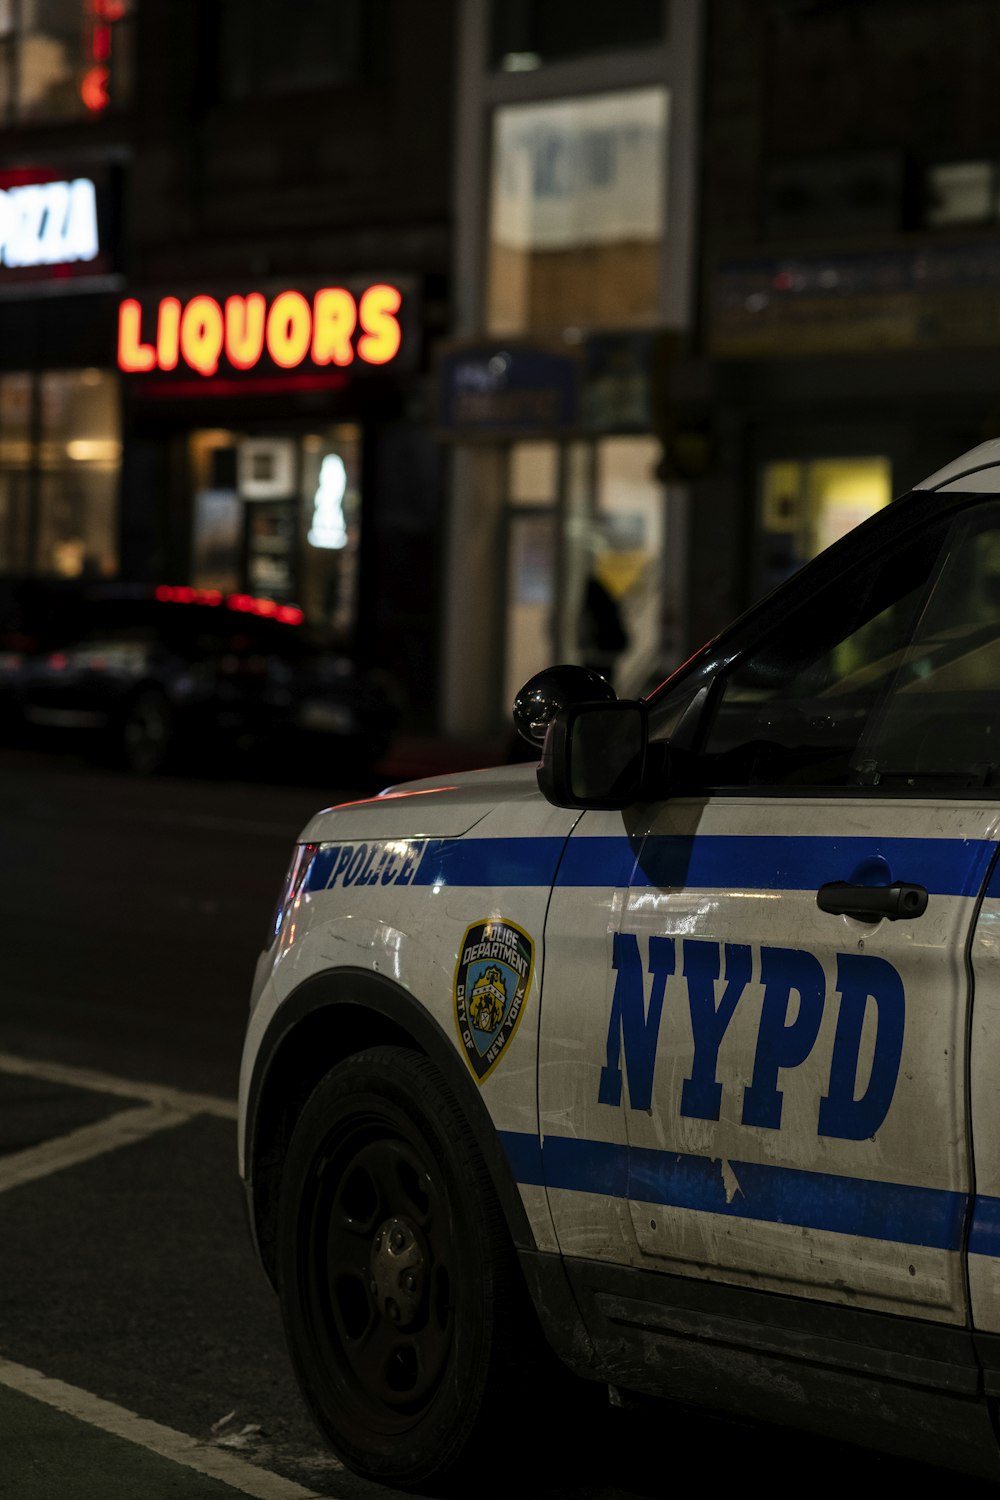 a nypd police car parked on the side of the street